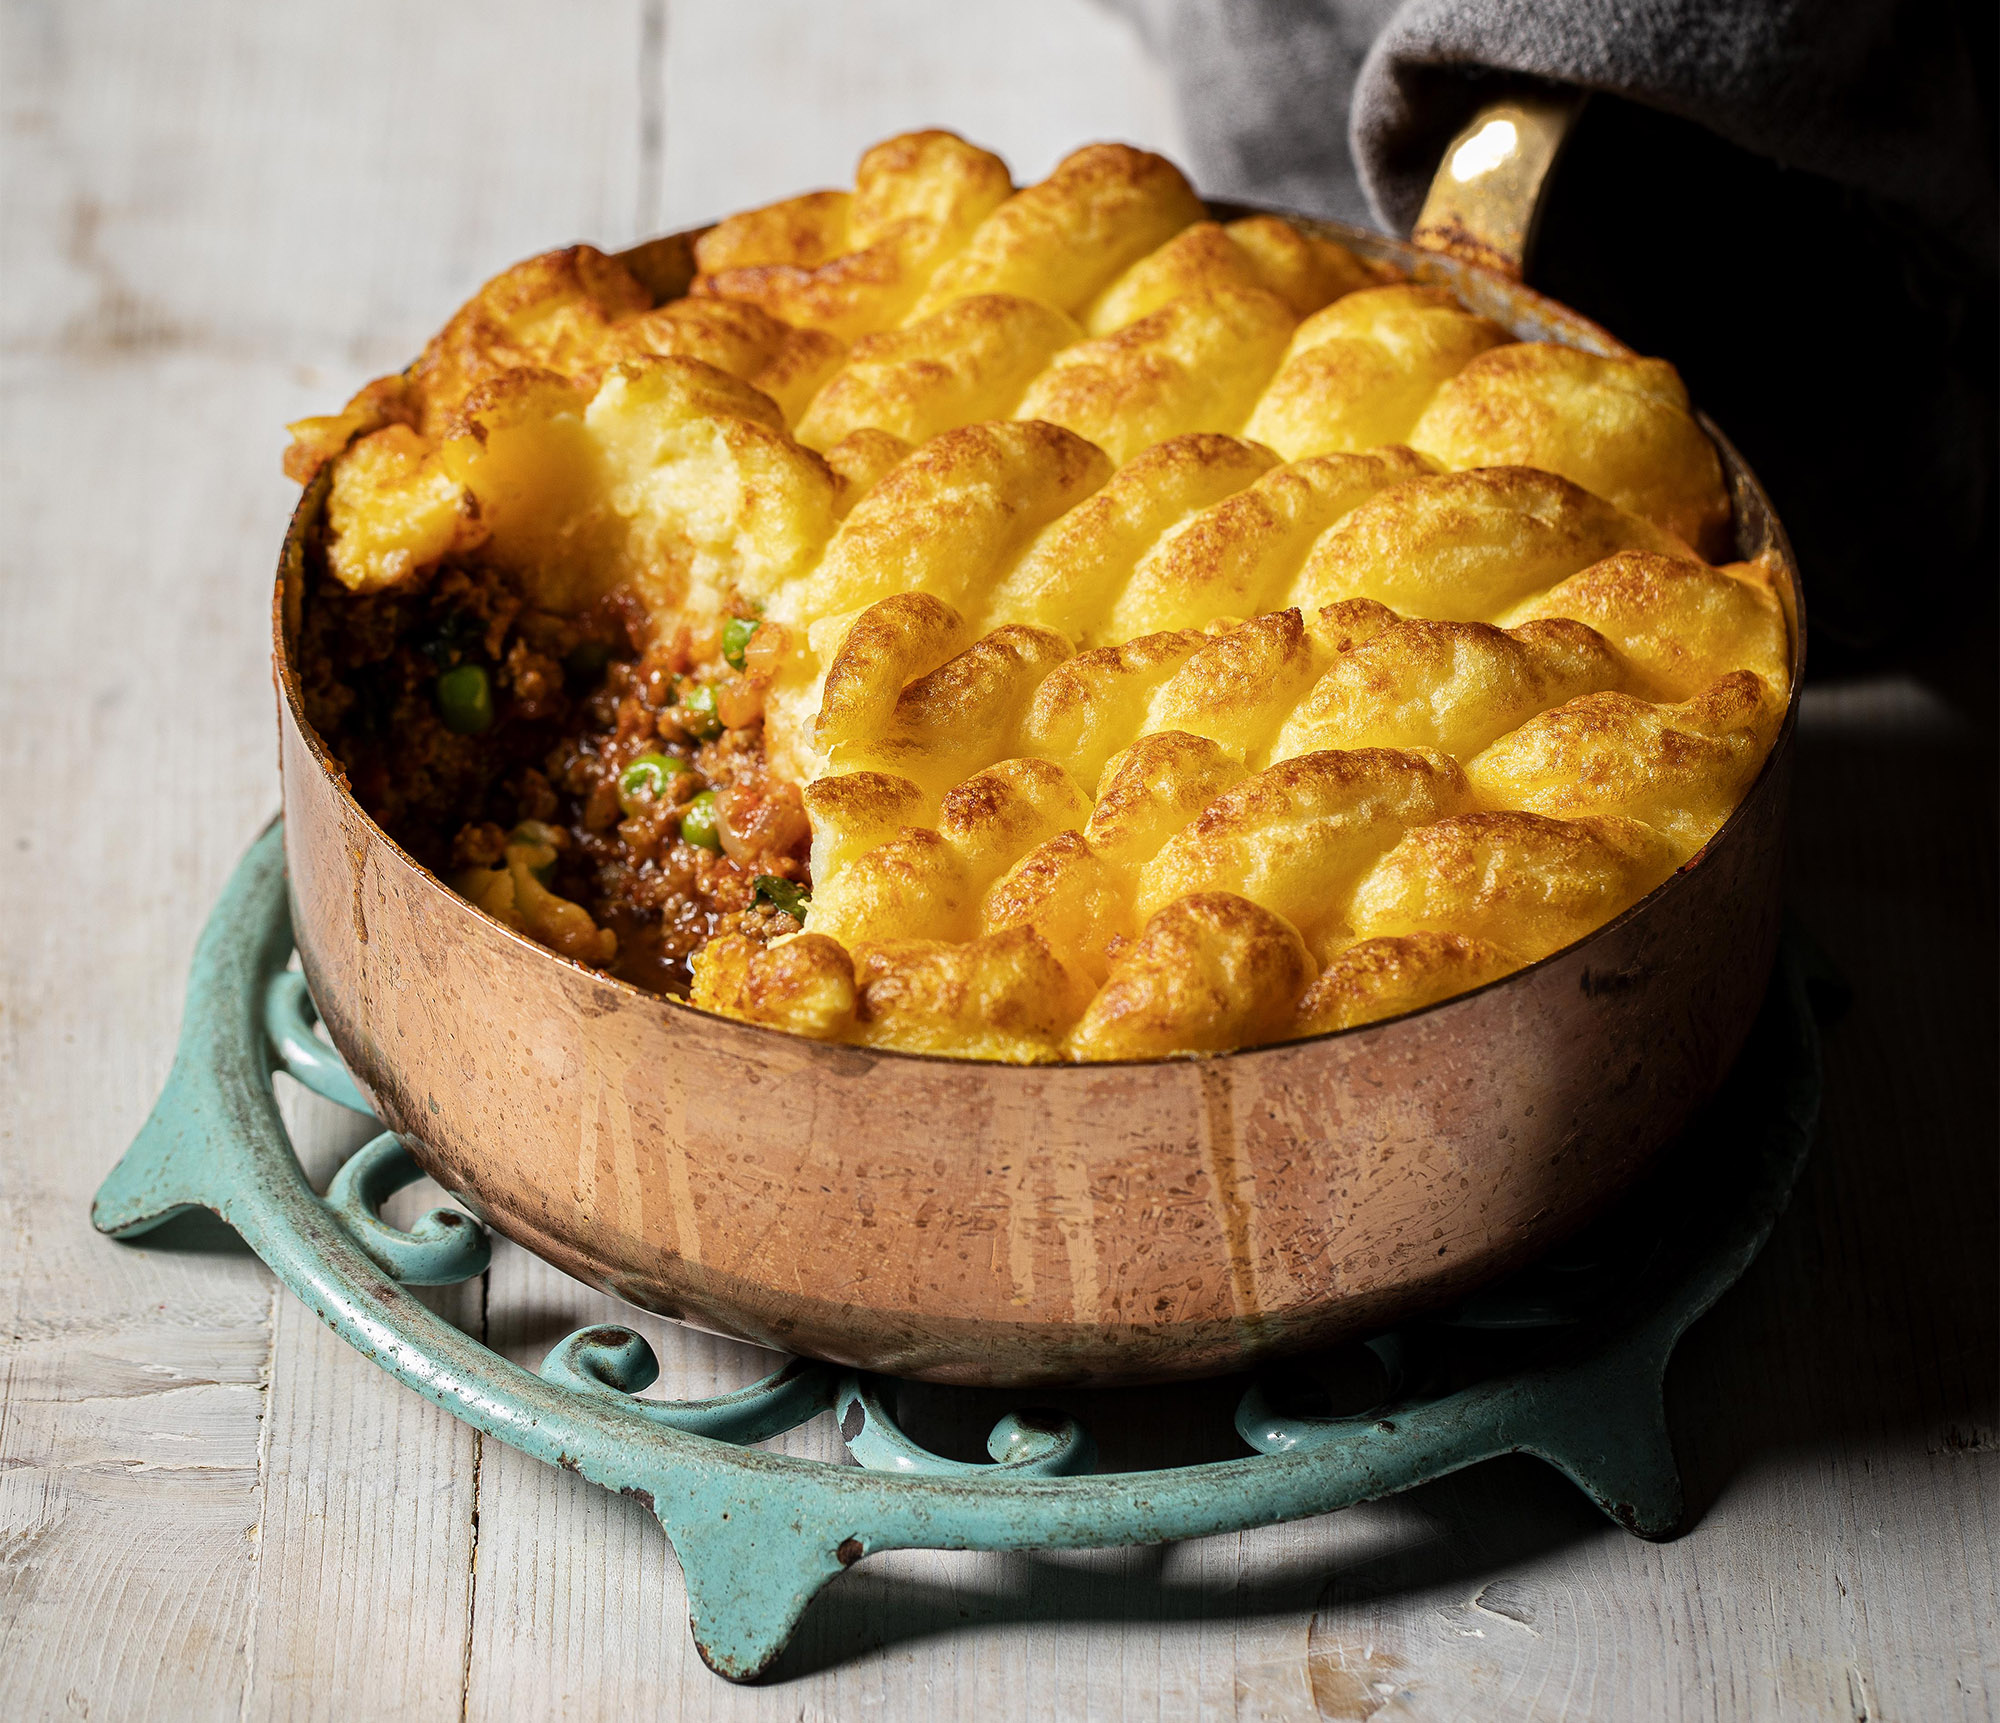 Keema-Spiced Cottage Pie as made by Calum Franklin.